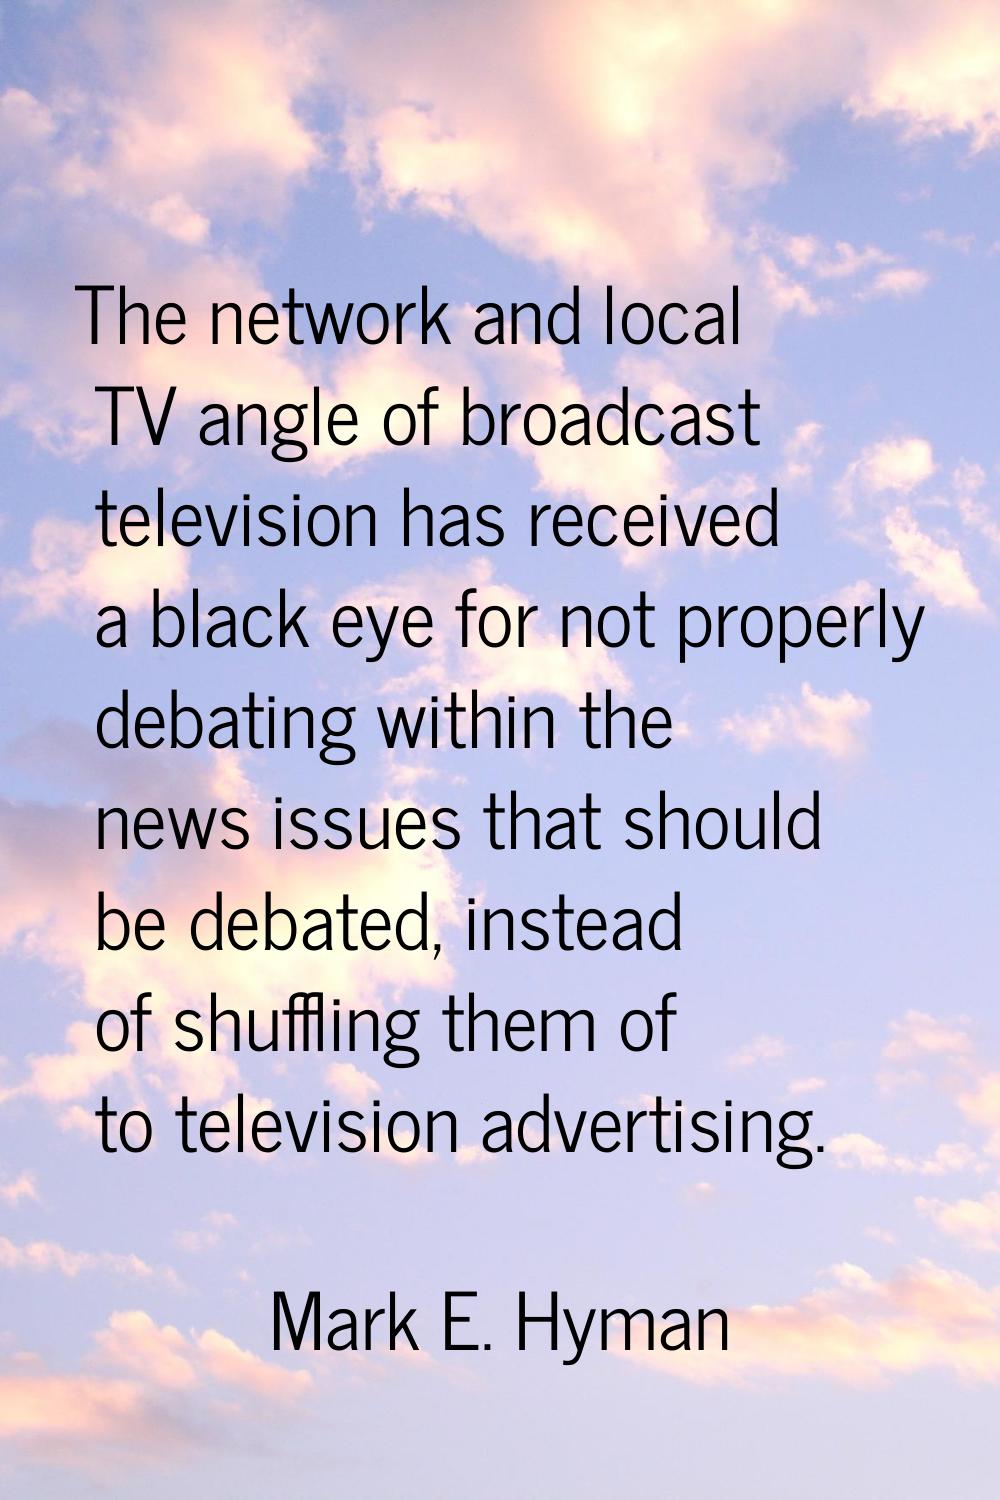 The network and local TV angle of broadcast television has received a black eye for not properly de